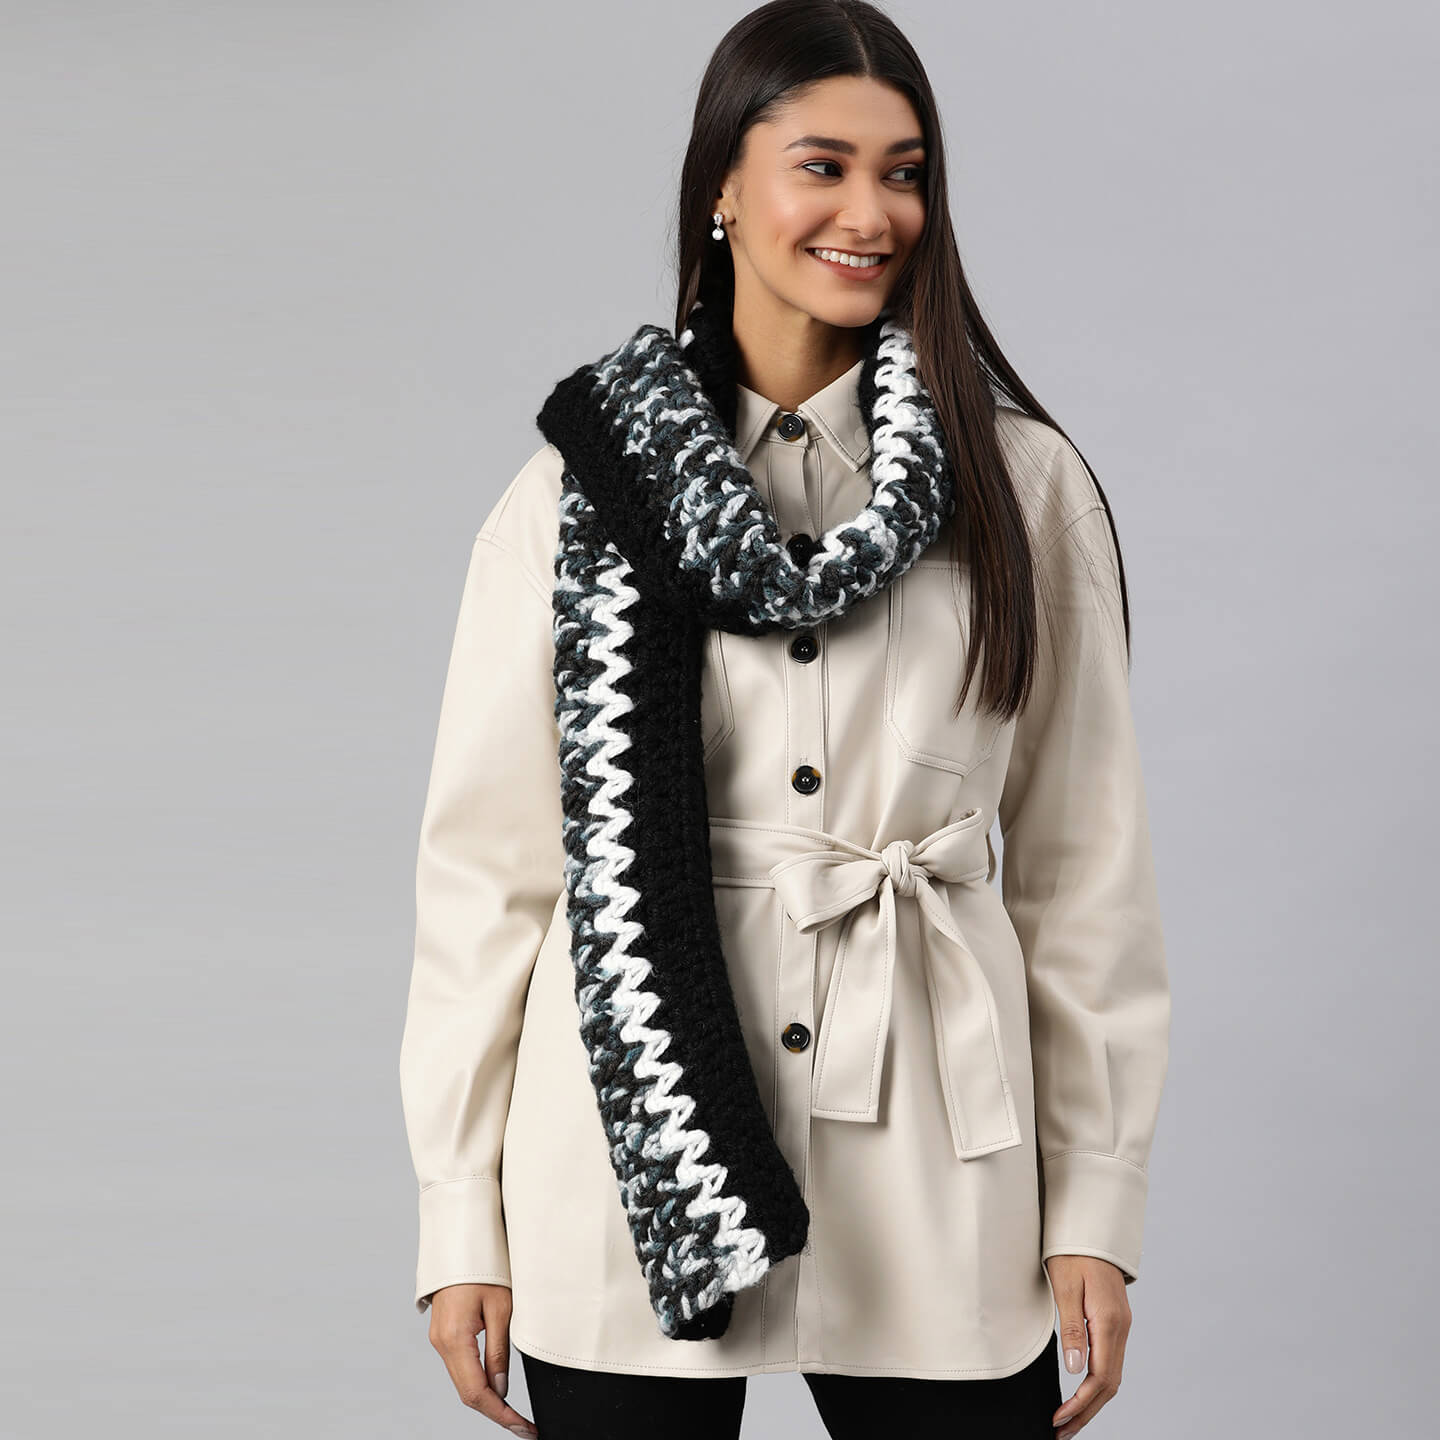 Thick and Warm Scarf - Multi-Color 2582